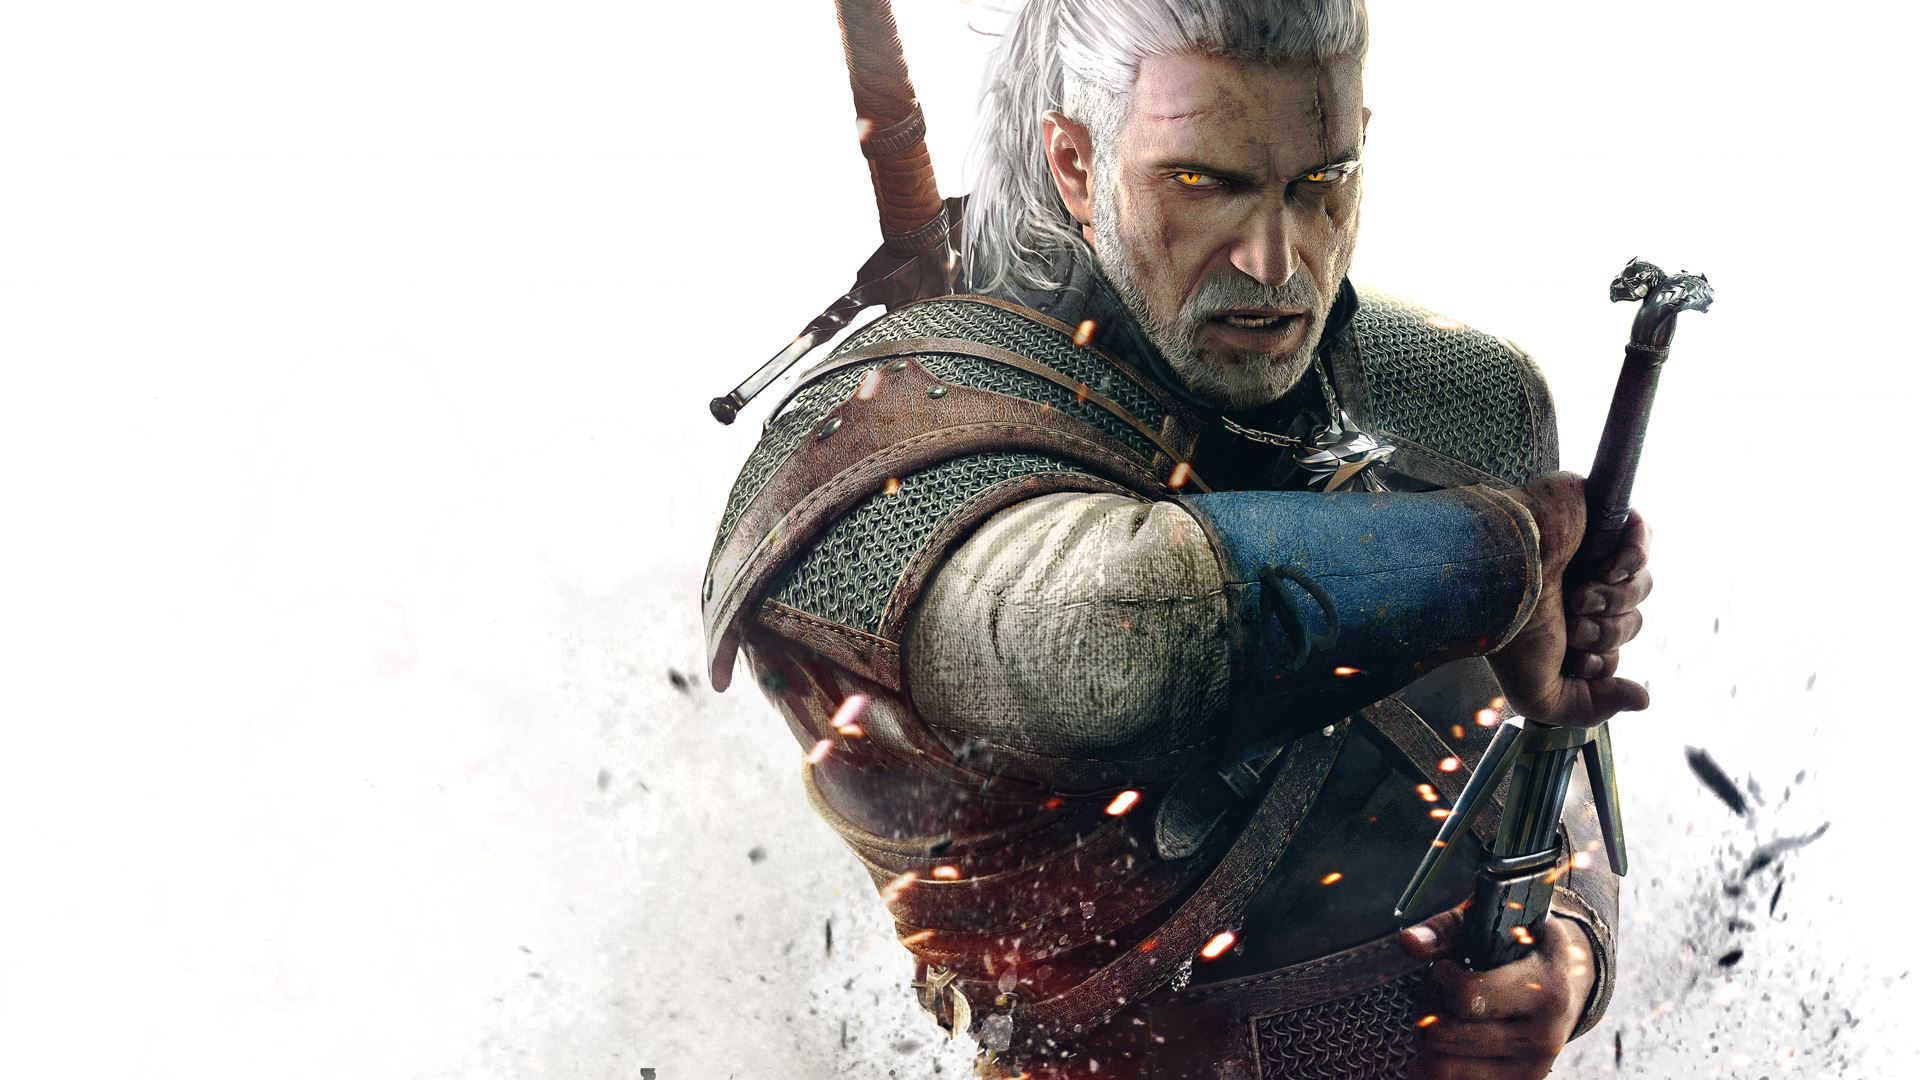 General 1920x1080 The Witcher 3: Wild Hunt Geralt of Rivia Video Game Heroes glowing eyes video games simple background white background RPG video game men video game characters Book characters CD Projekt RED